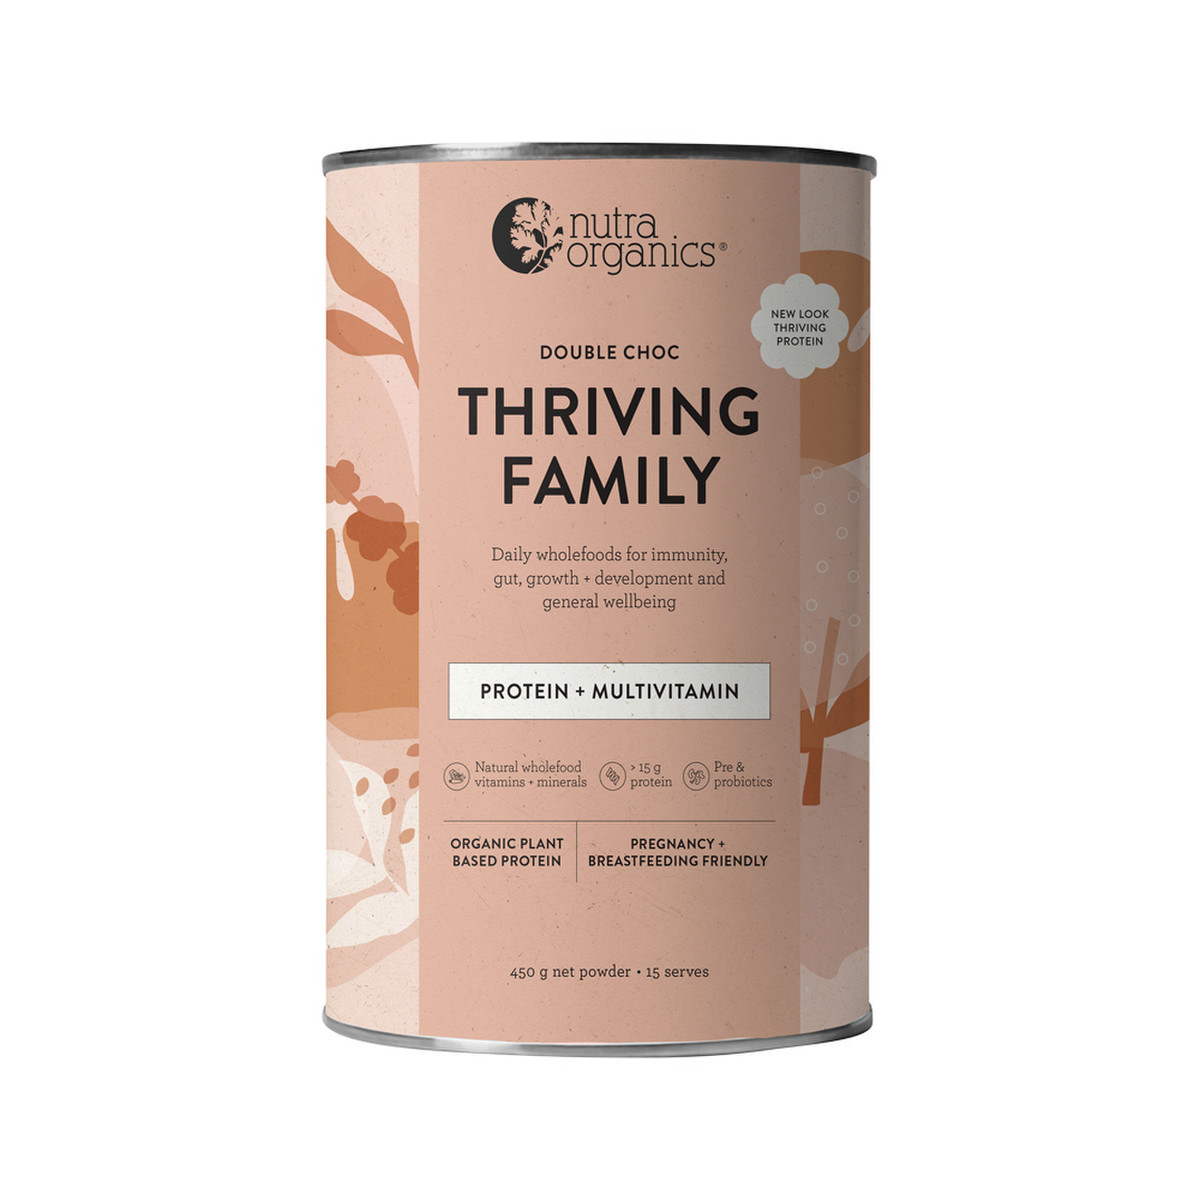 NUTRA ORGANICS - Thriving Family Protein (Protein + Multivitamin) Double Choc 450g